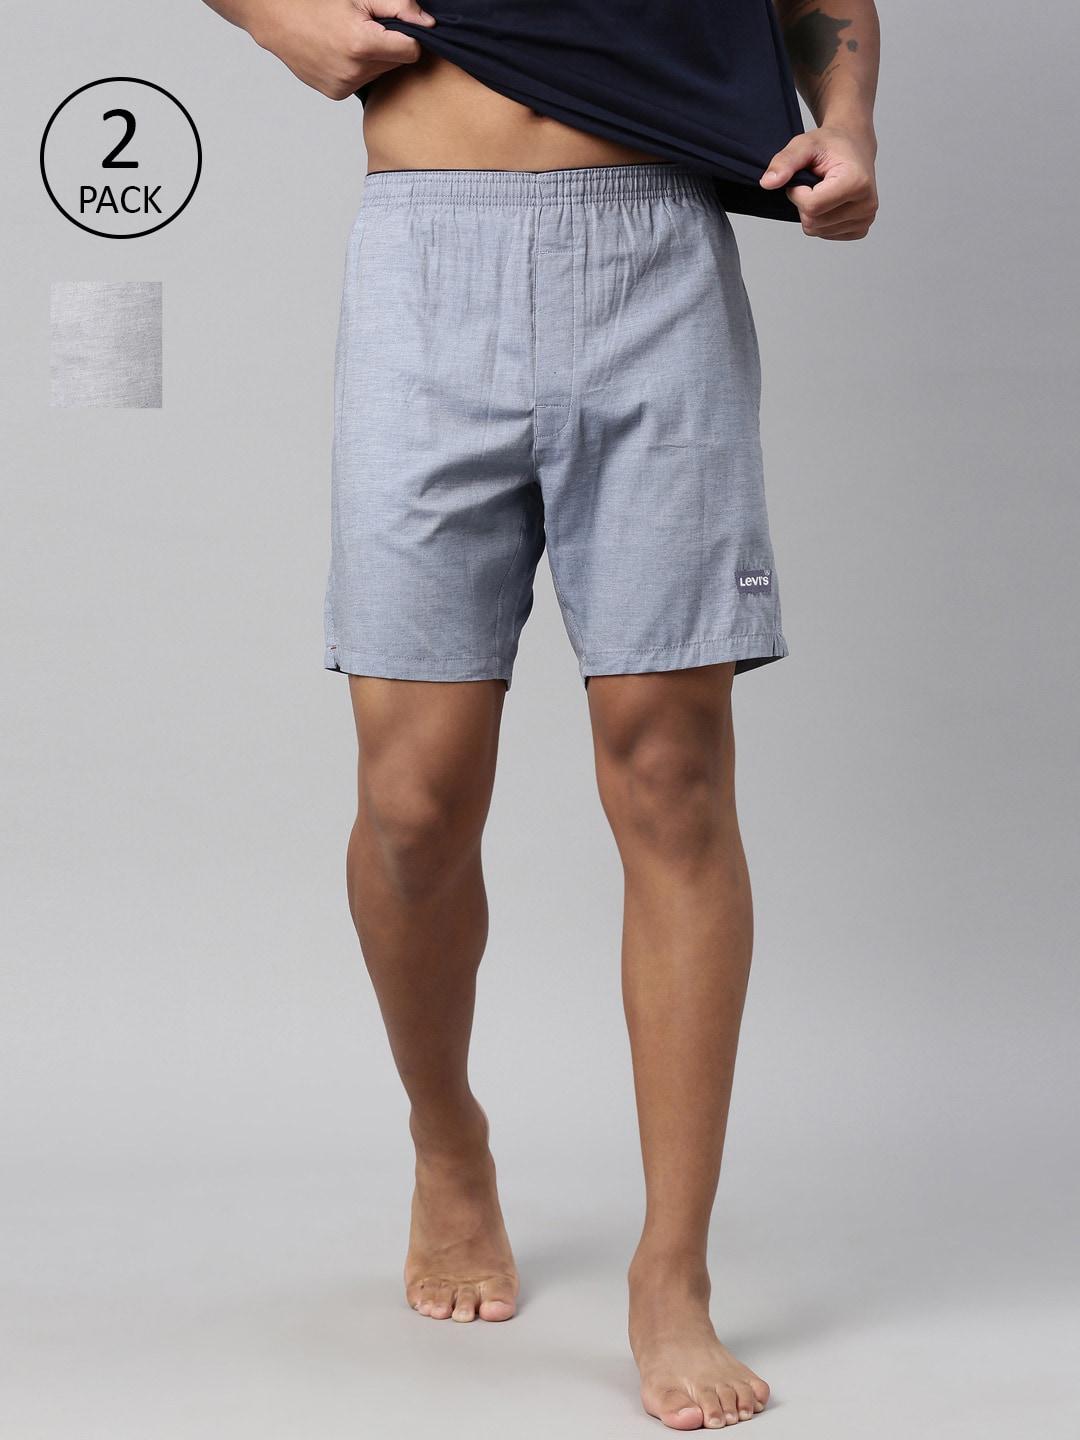 levis-men-pack-of-2-smartskin-technology-woven-cotton-trunks-with-tag-free-comfort-028